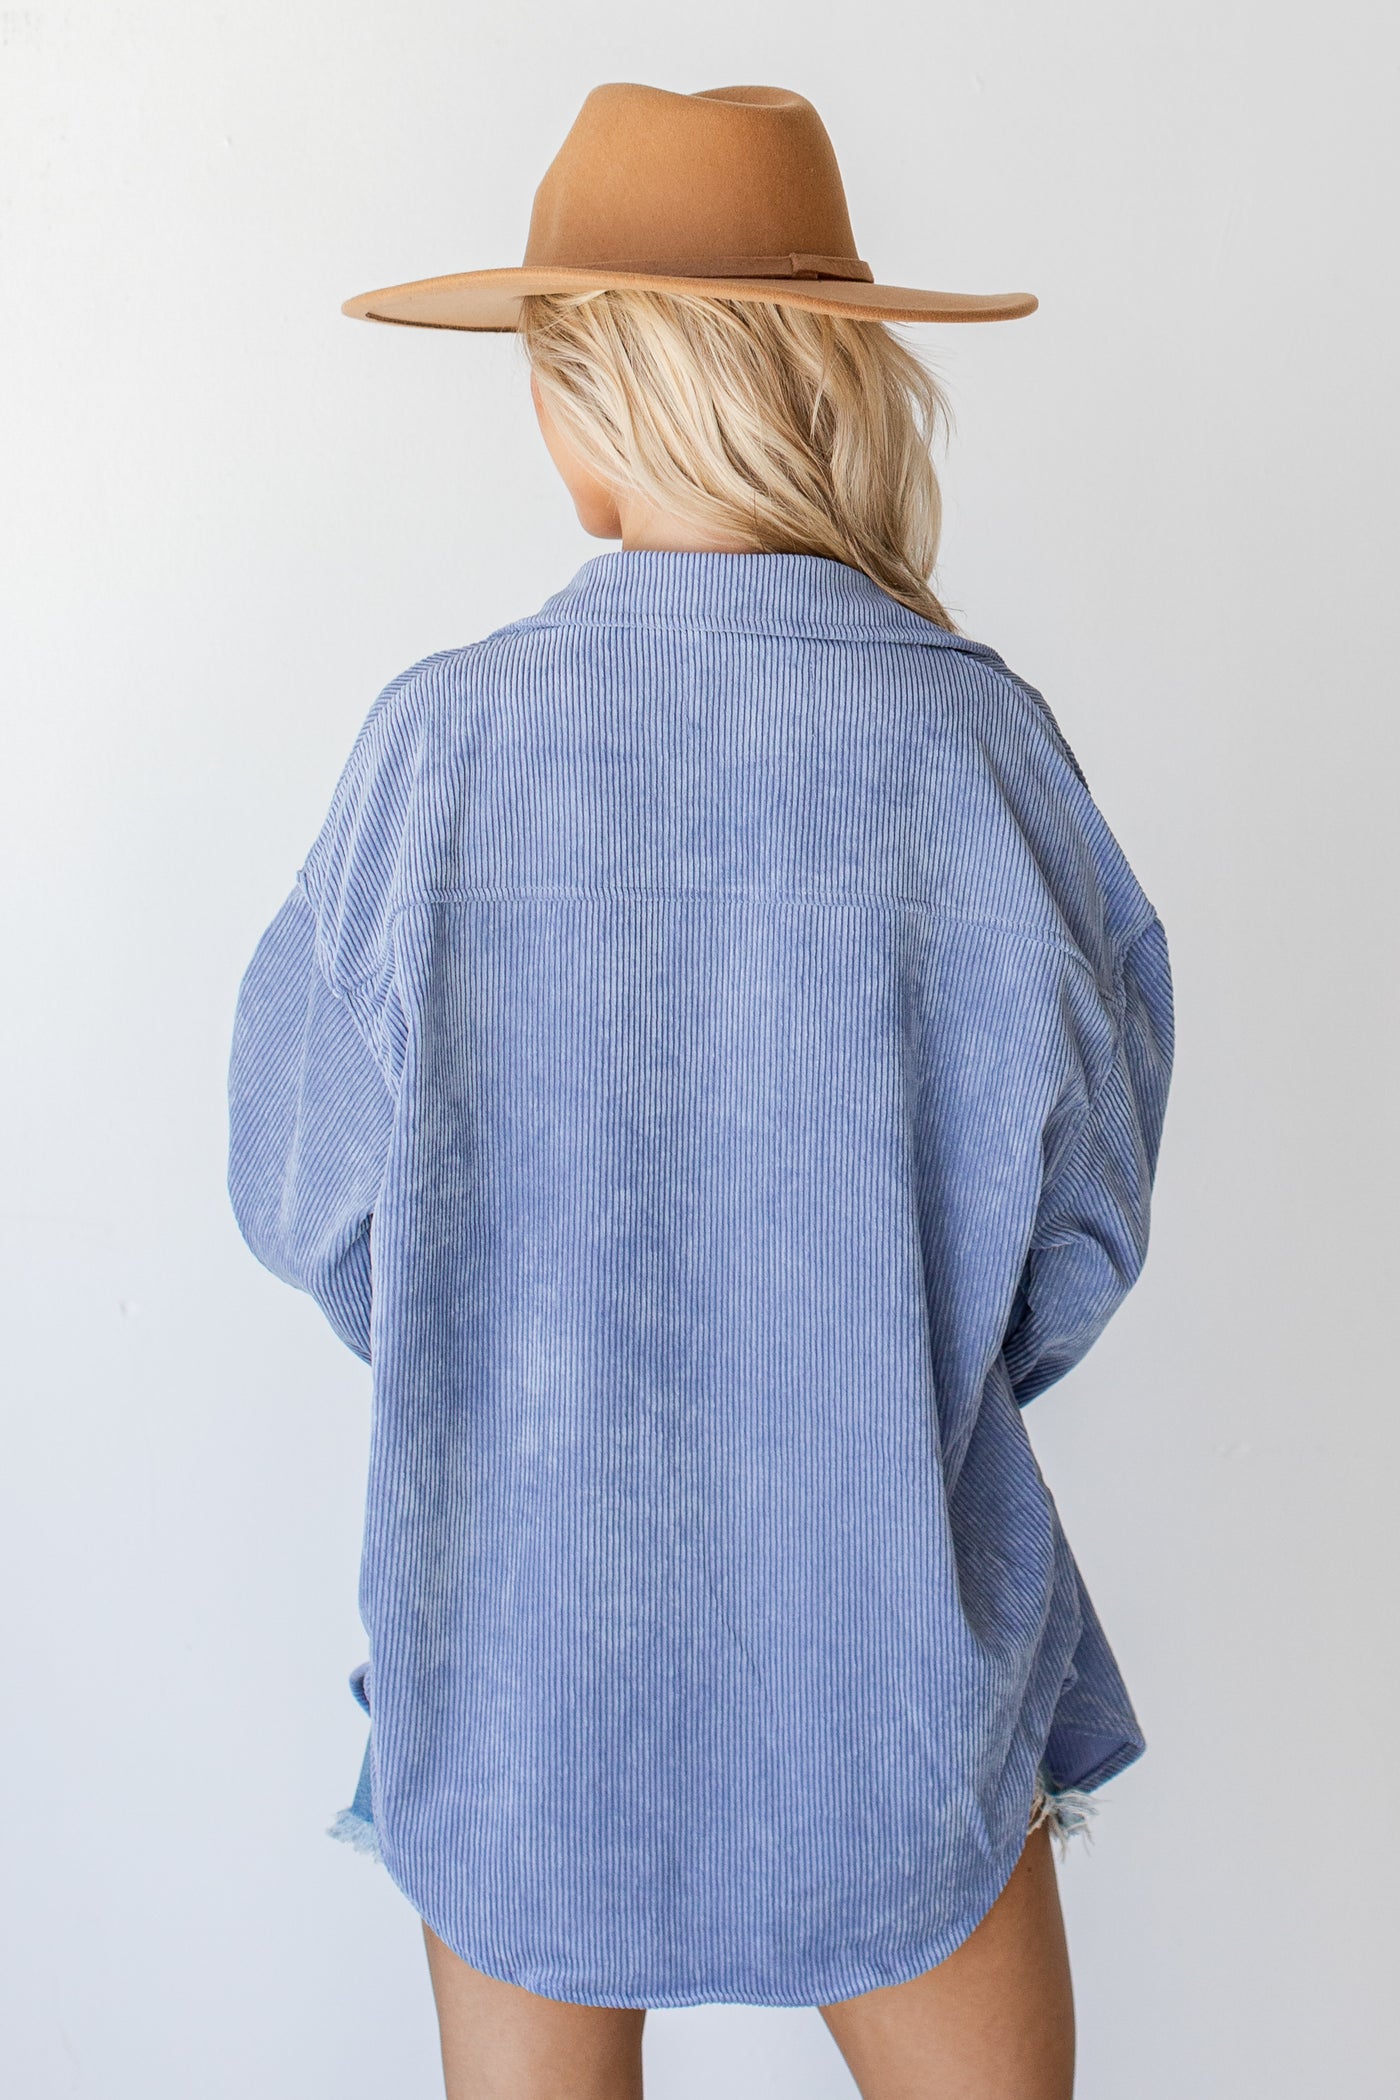 Corduroy Shacket in blue back view